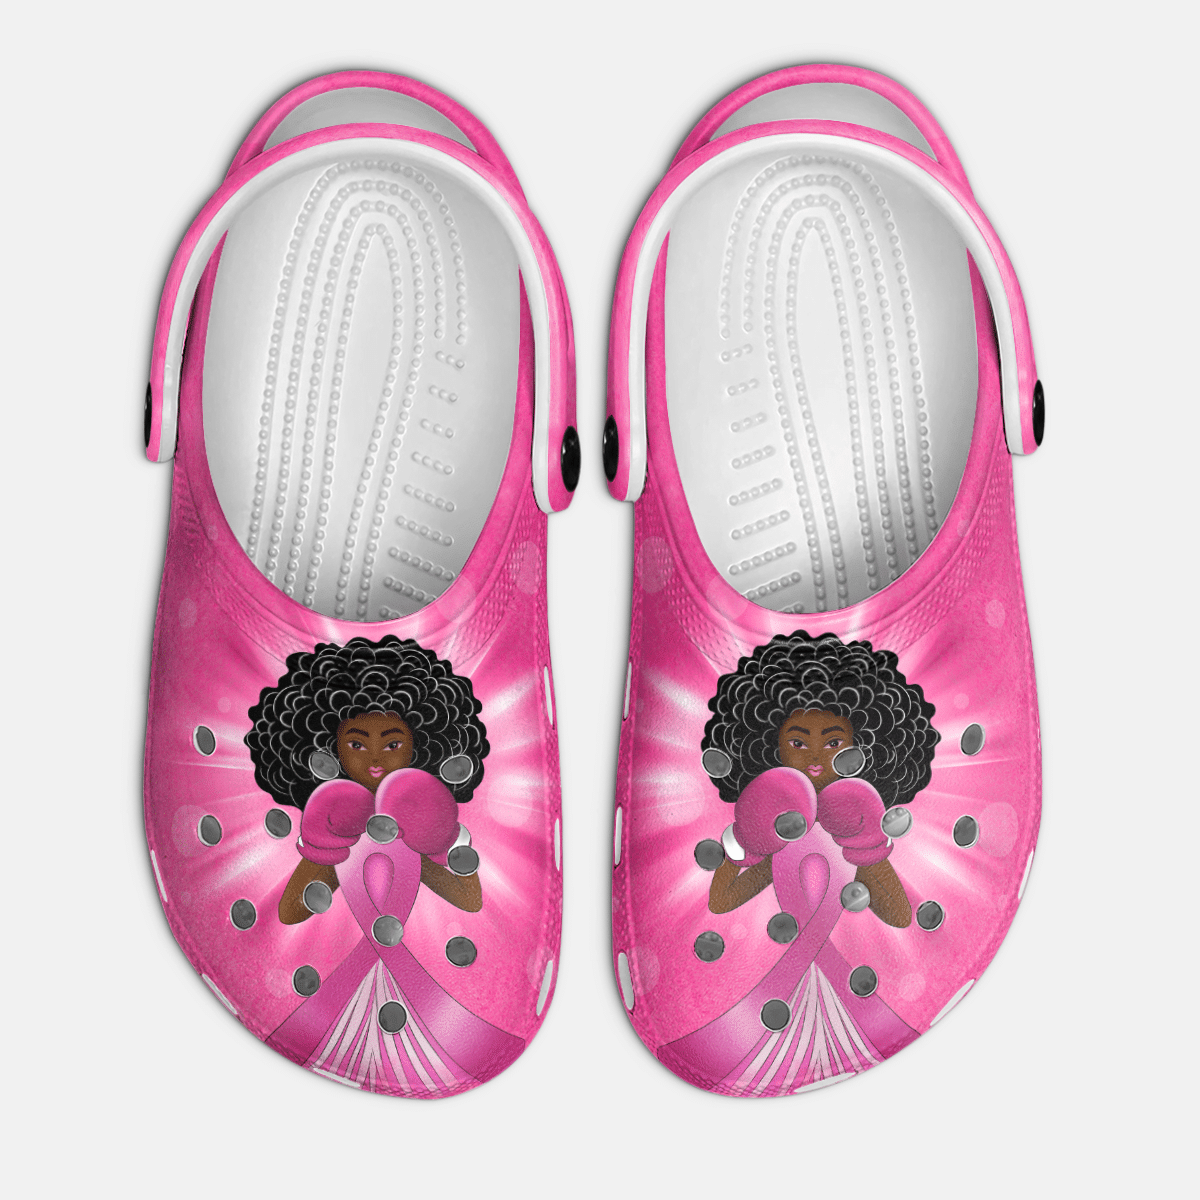 Breast Cancer File Like A Girl Black Woman Crocs Classic Clogs Shoes PANCR0730